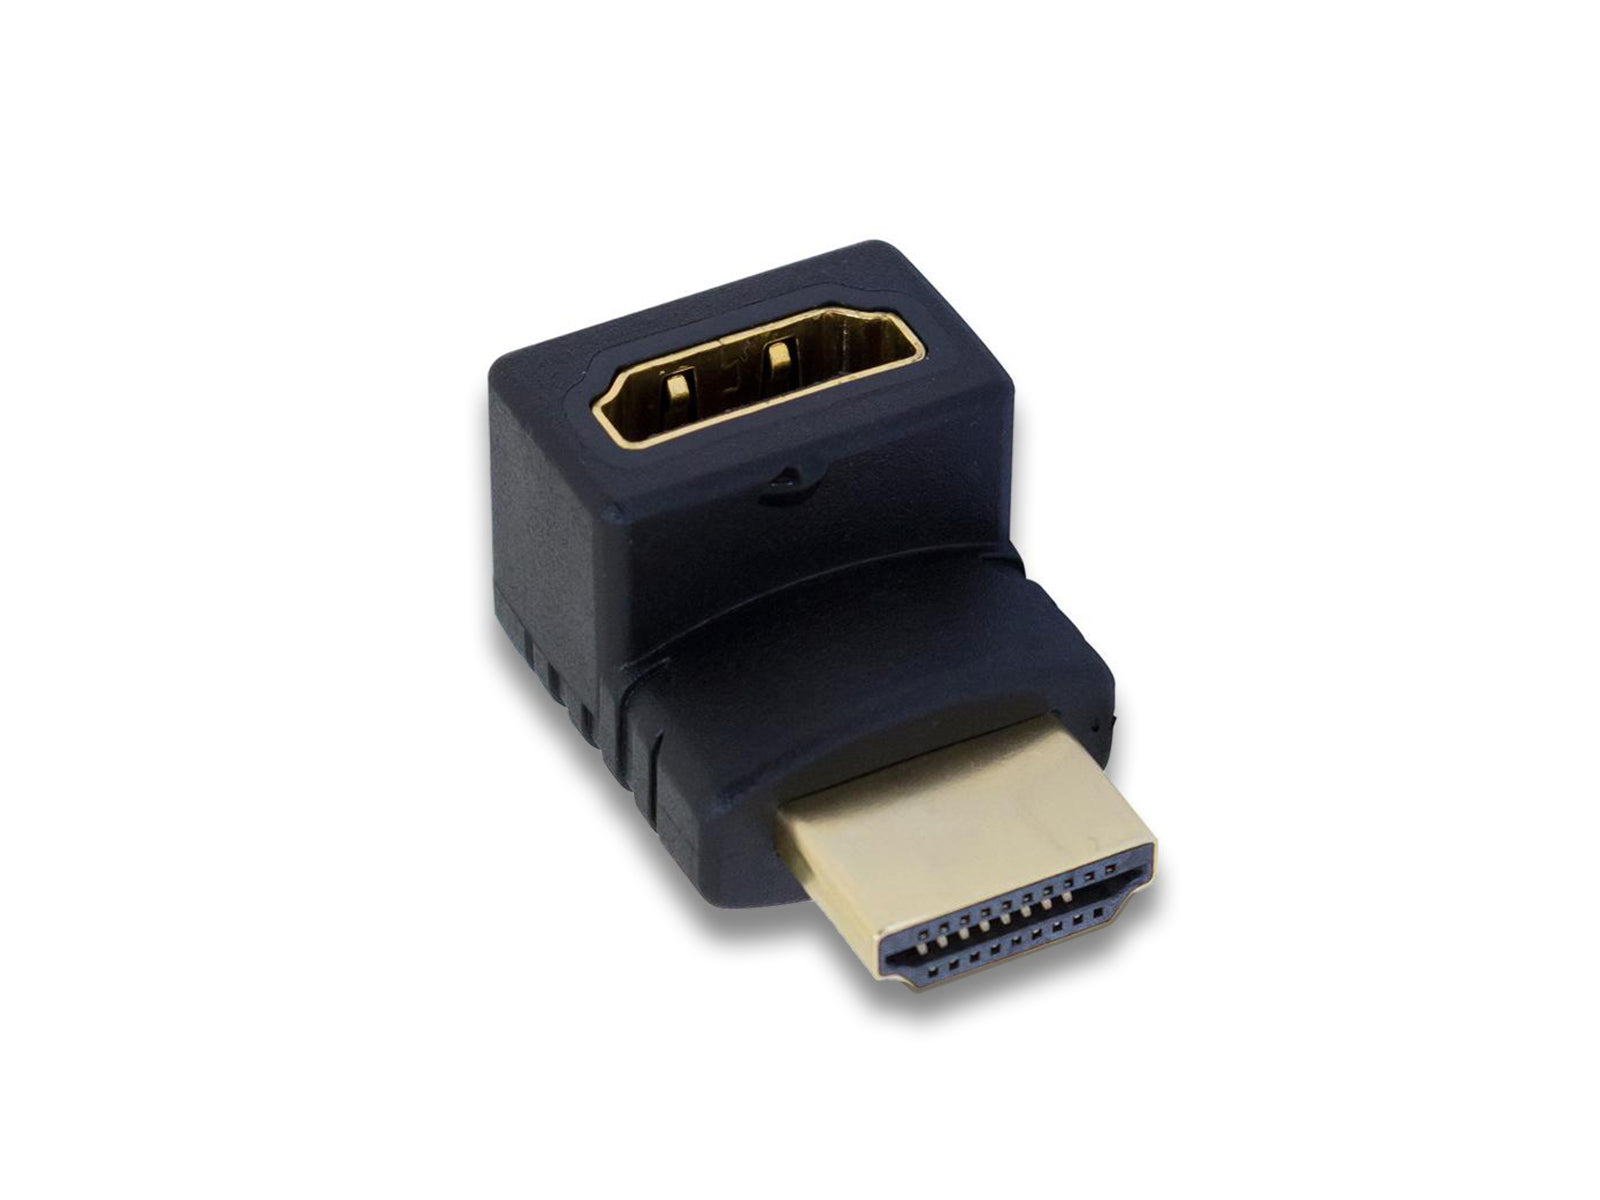 4K HDMI Adapter Side View Angled